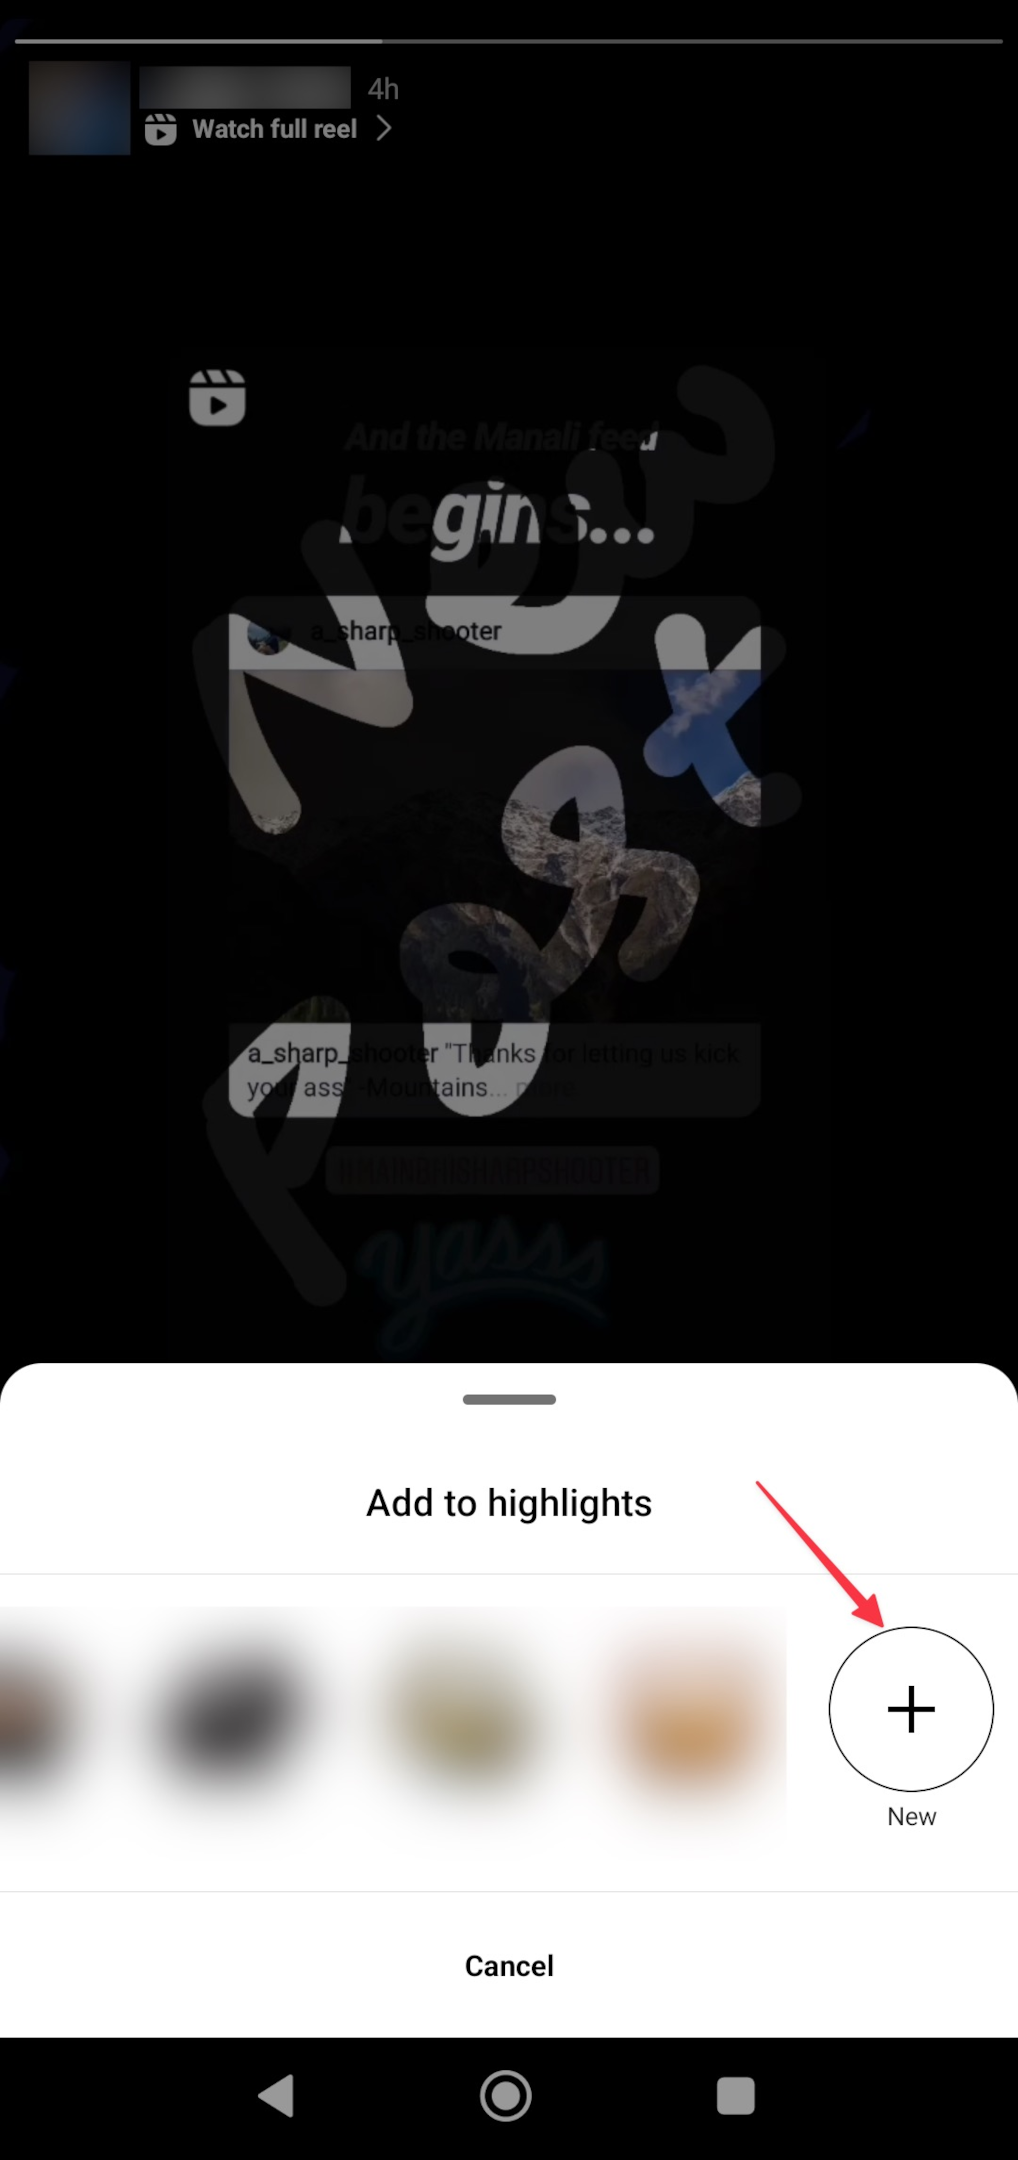 Remote.tools shows how to create new highlight for your Instagram account